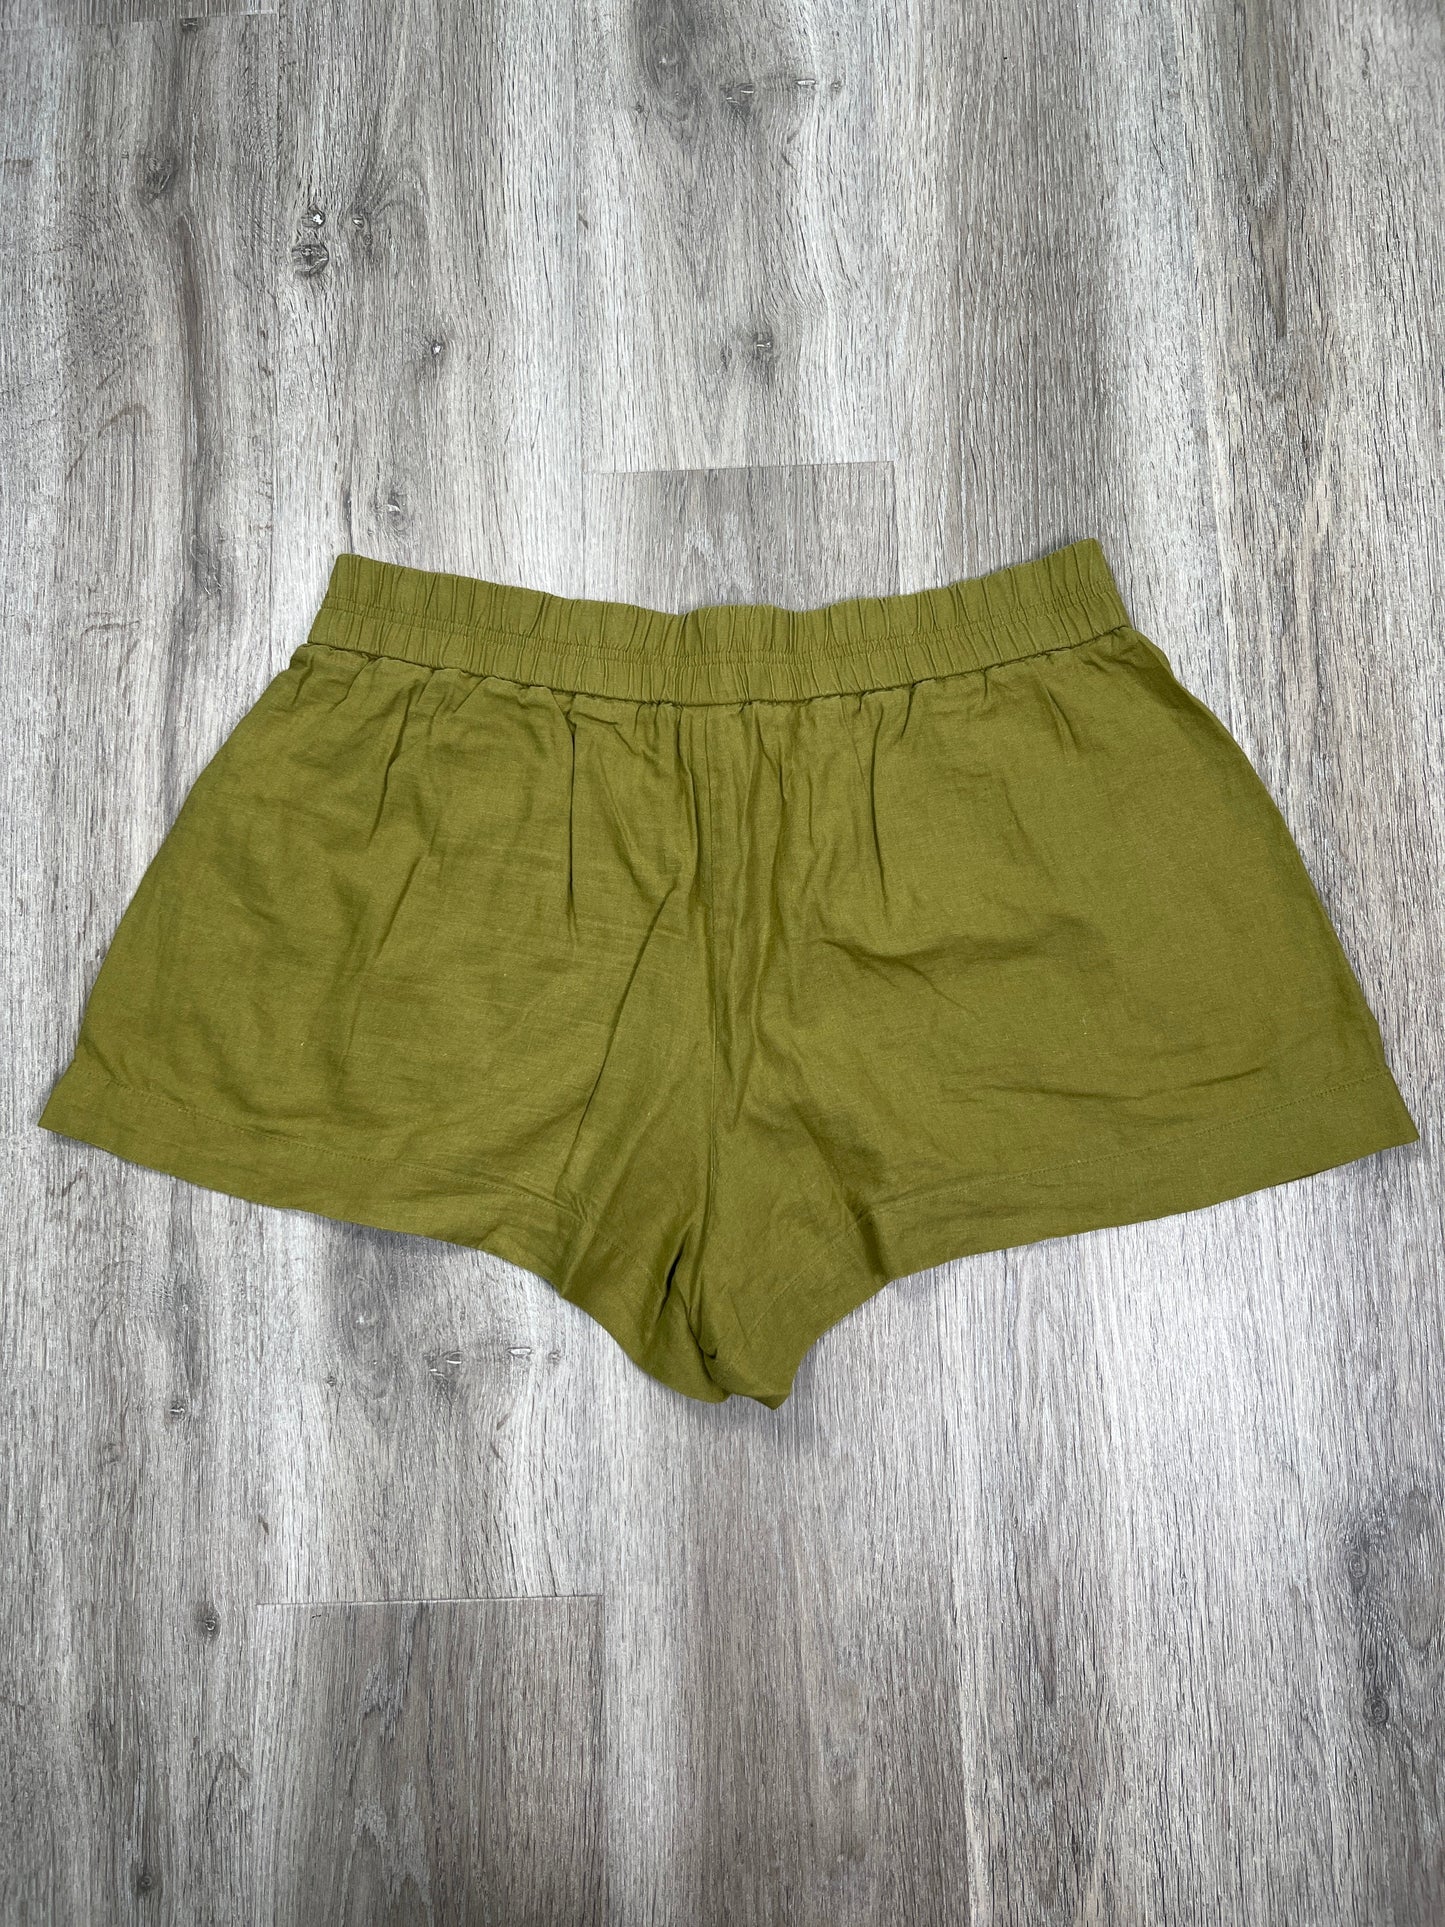 Green Shorts A New Day, Size Xl